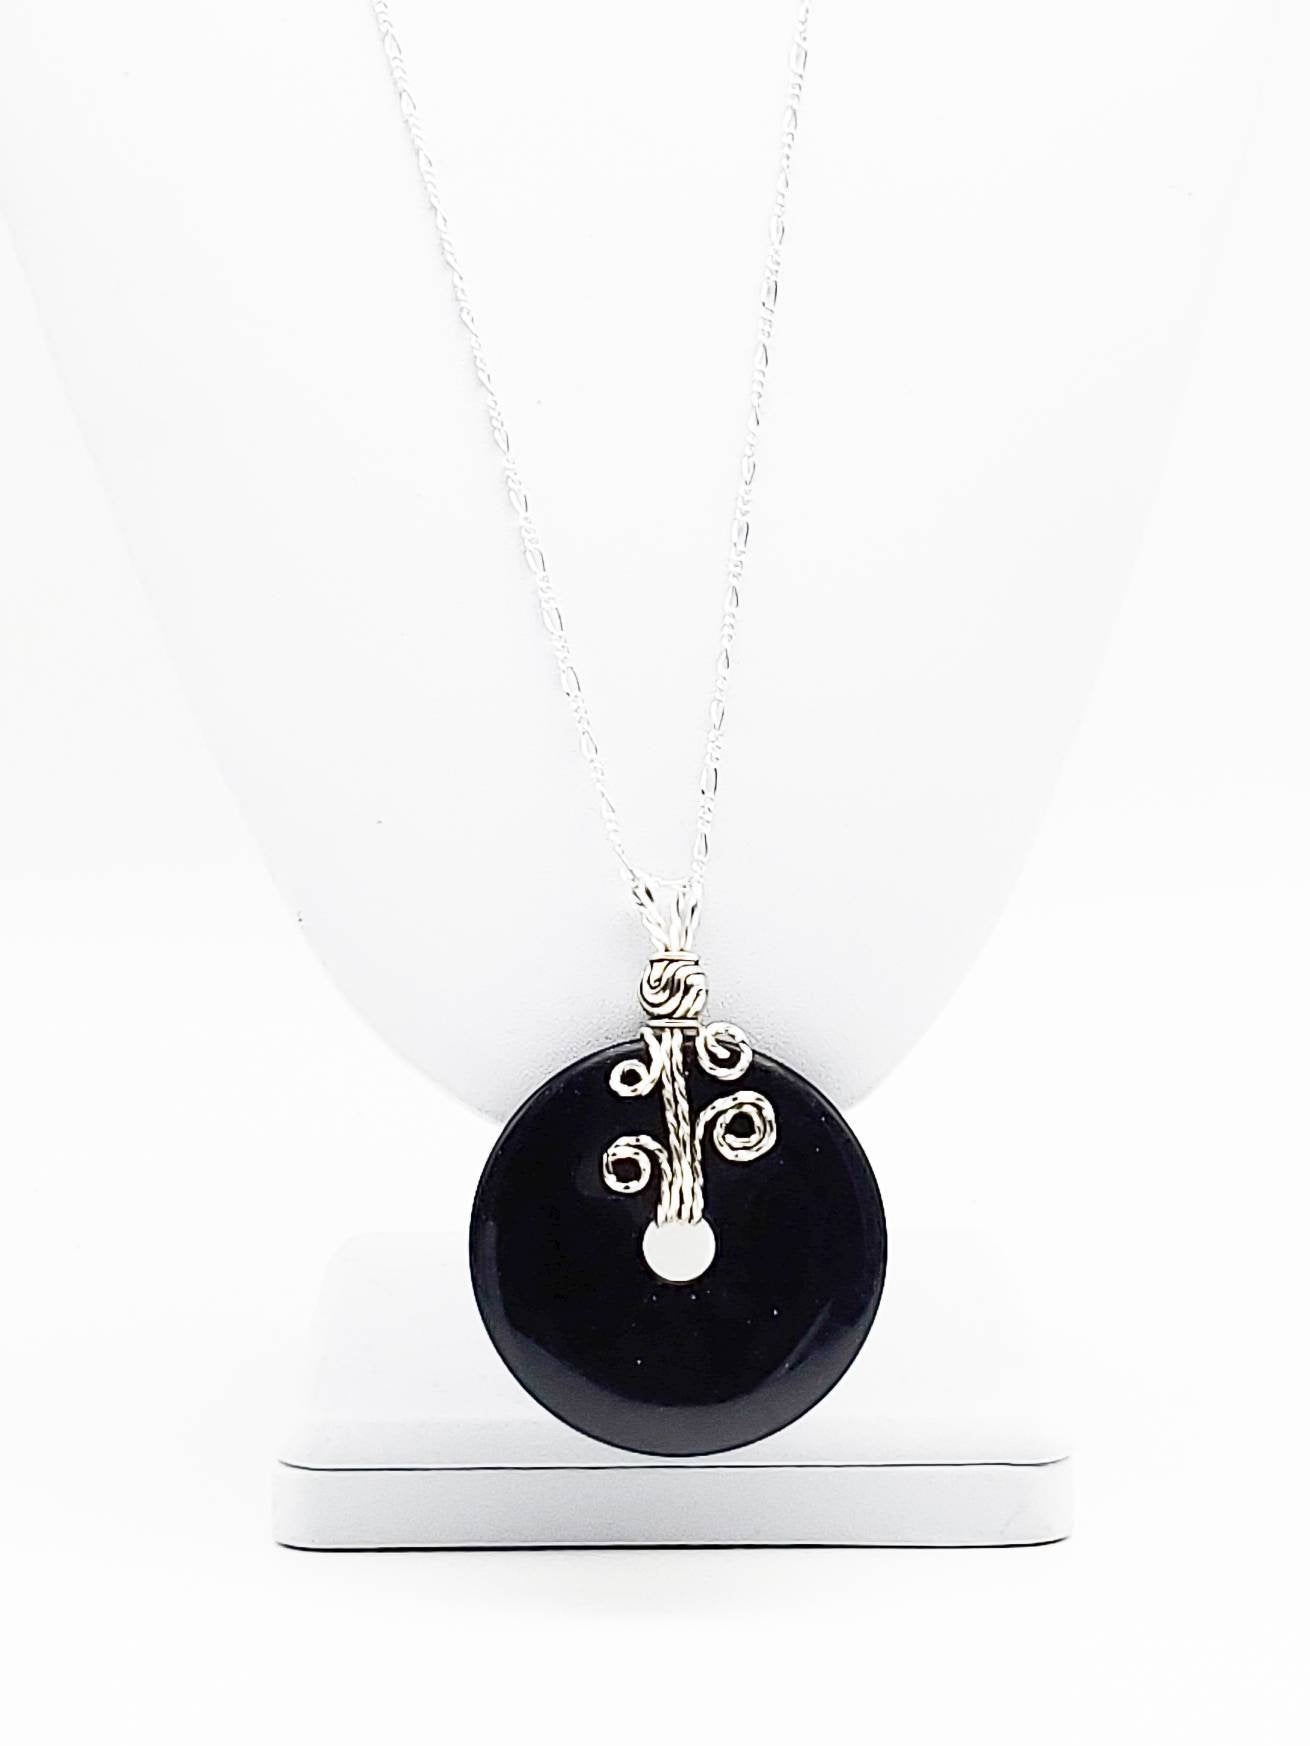 Midnight Blue Sandstone Necklace - The Caffeinated Raven